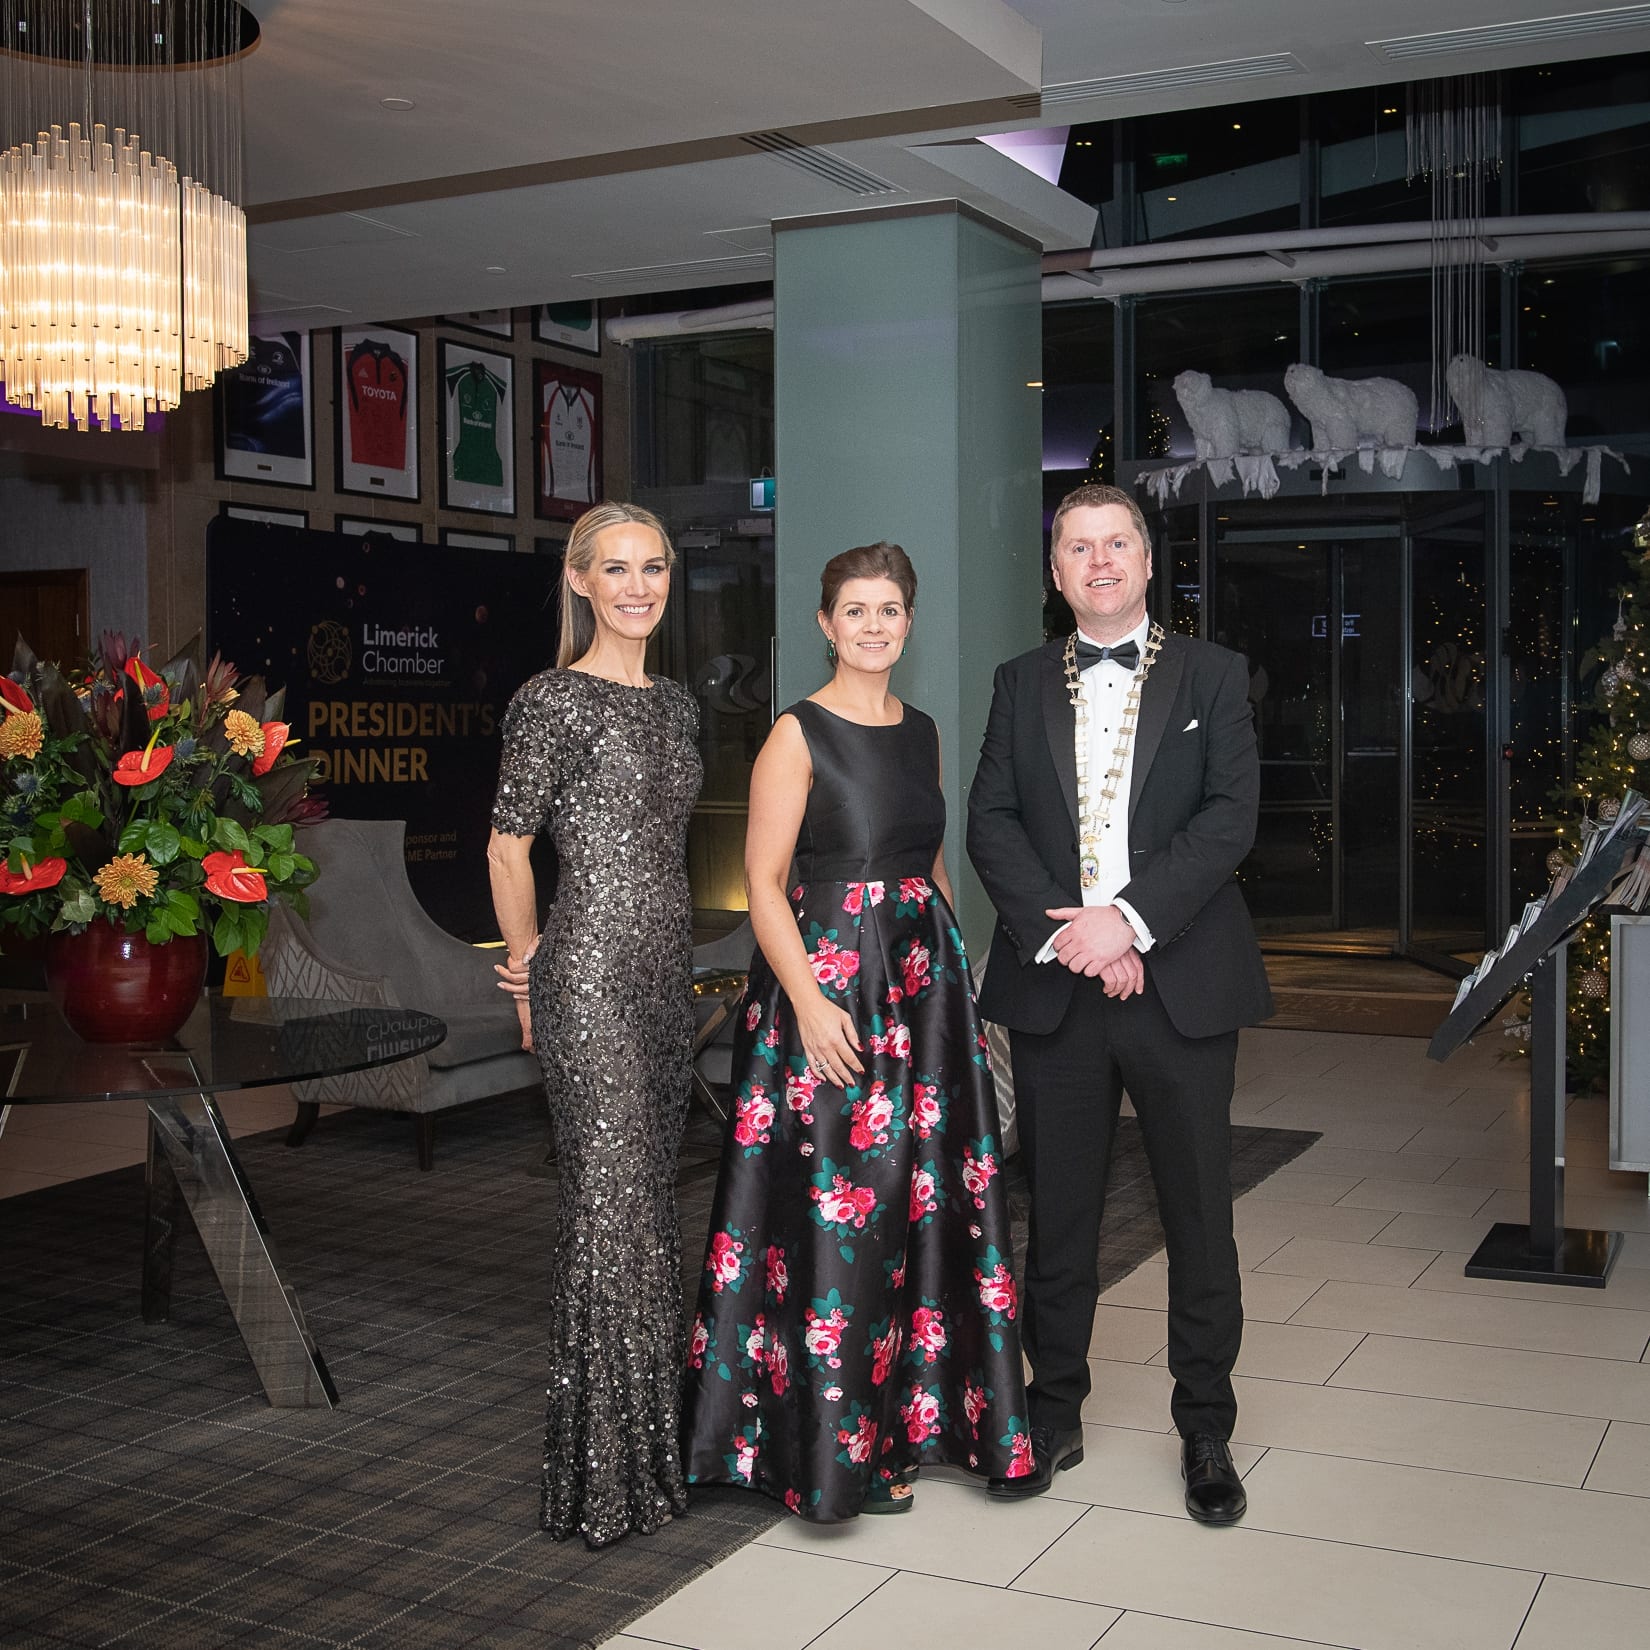 No repro fee-Limerick Chamber President’s Dinner
and Limerick Chamber Regional Business Awards 2019 which was held in the Strand Hotel on Friday 15th November - From Left to Right: Dee Ryan - CEO Limerick Chamber, Orlaith Borthwick - LIT, Eoin Ryan - President Limerick Chamber,
Photo credit Shauna Kennedy